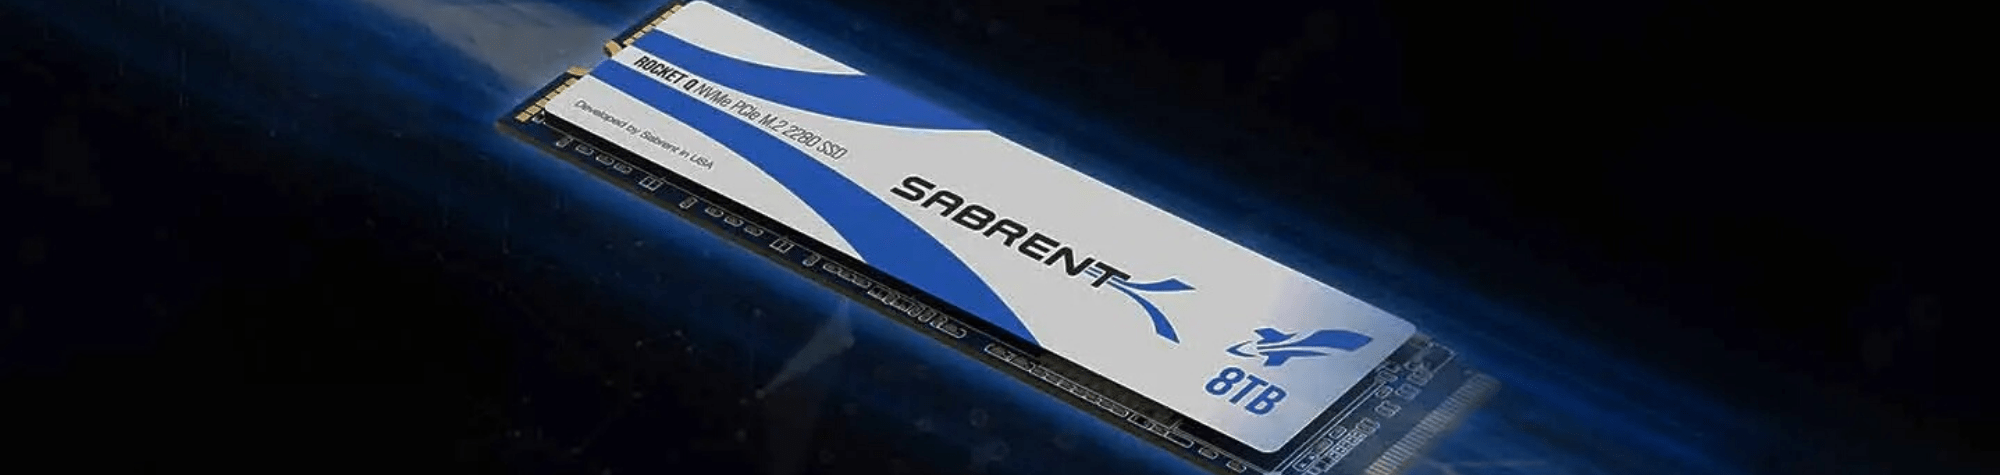 Say Hello to the Rocket Q 8TB SSD from Sabrent